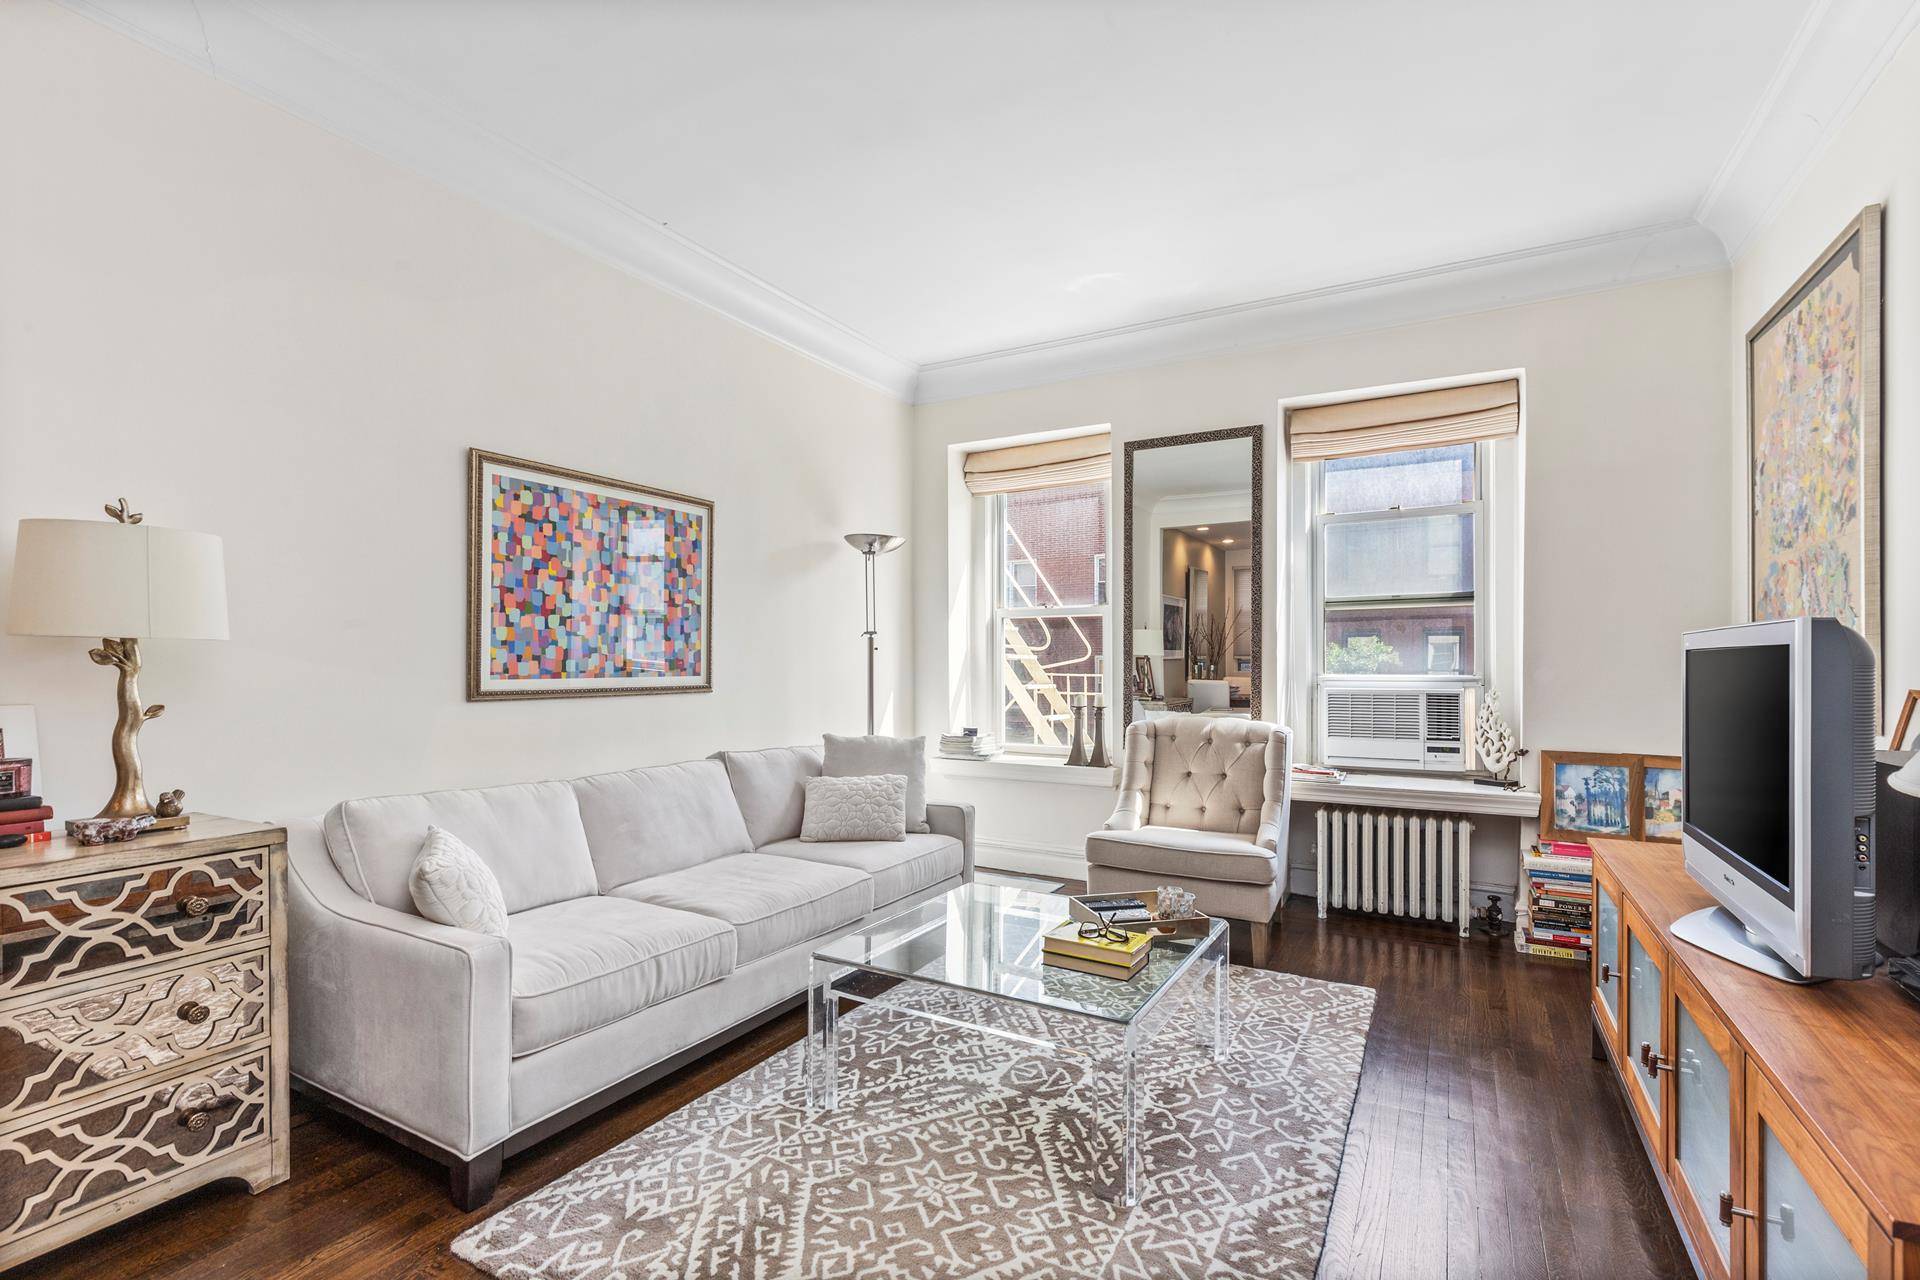 Massive sunny, south facing one bedroom apartment in a well maintained Pre War building with laundry and live in super located a block from beautiful Carl Schurz Park.